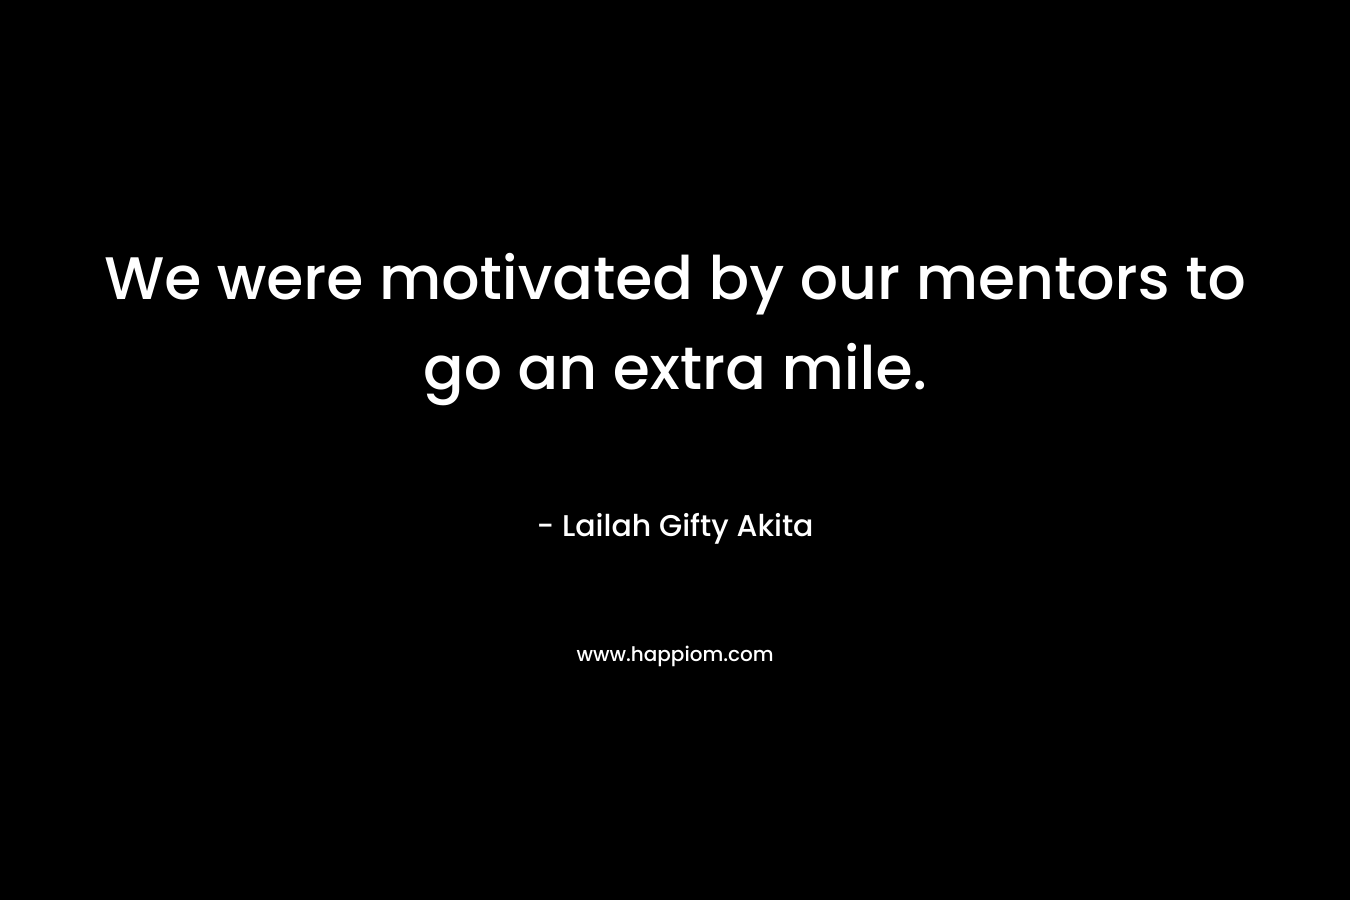 We were motivated by our mentors to go an extra mile. – Lailah Gifty Akita